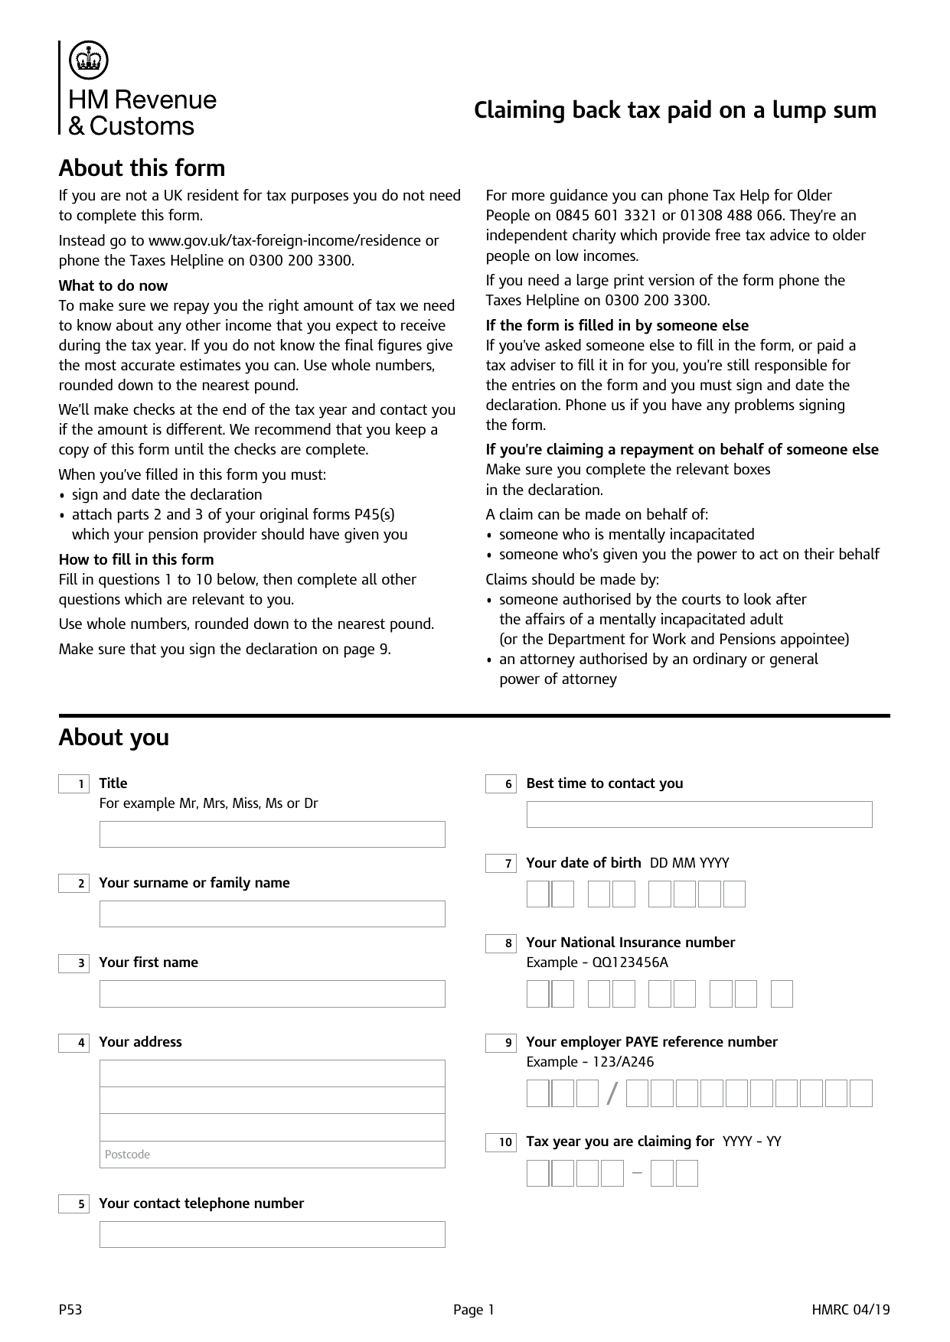 Form P53 Claiming Back Tax Paid on a Lump Sum - United Kingdom, Page 1